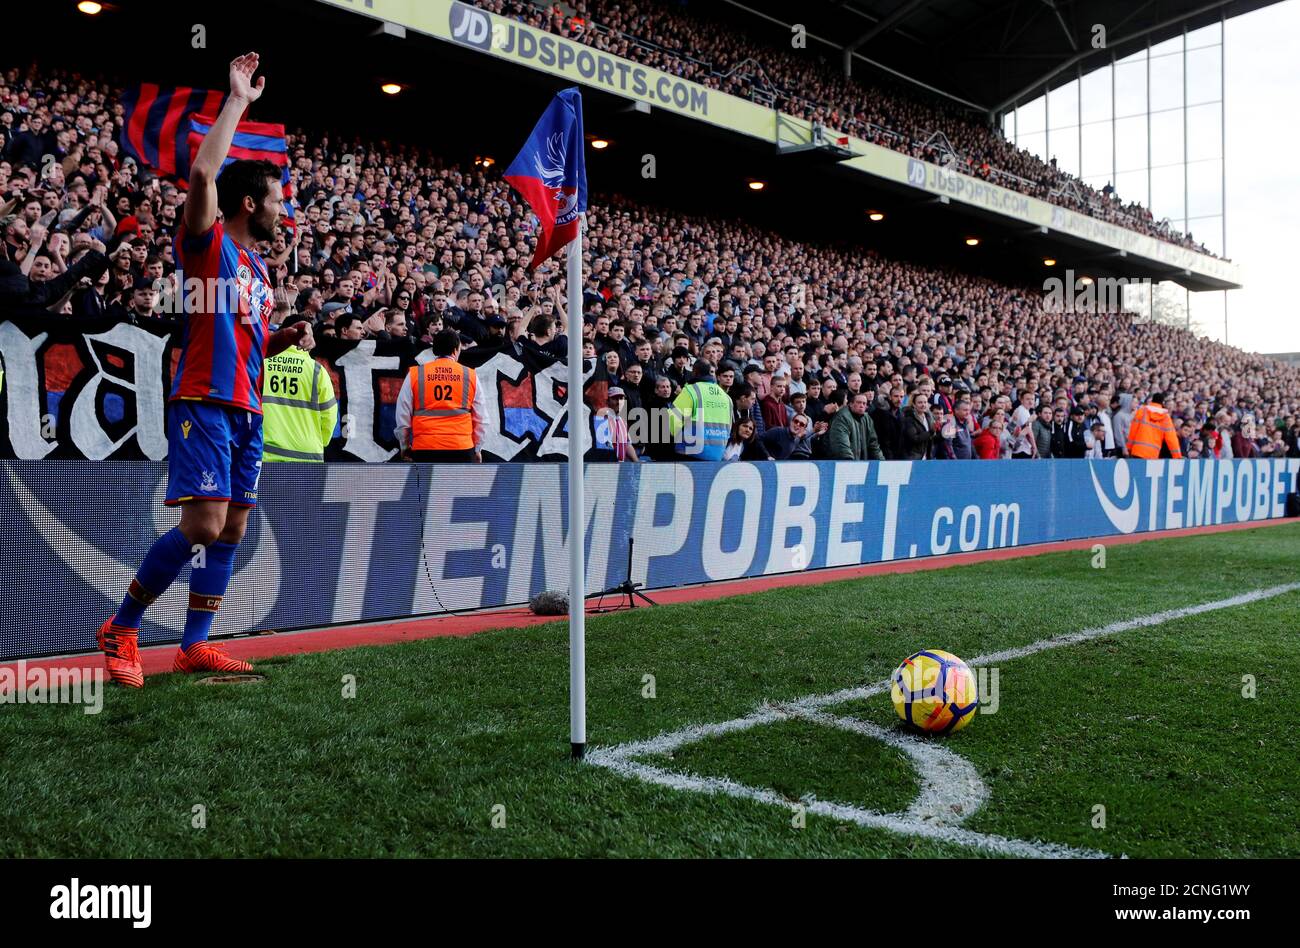 Soccer Football - Premier League - Crystal Palace vs West Ham United - Selhurst Park, London, Britain - October 28, 2017   Crystal Palace's Yohan Cabaye prepares to take a corner   REUTERS/Eddie Keogh    EDITORIAL USE ONLY. No use with unauthorized audio, video, data, fixture lists, club/league logos or 'live' services. Online in-match use limited to 75 images, no video emulation. No use in betting, games or single club/league/player publications. Please contact your account representative for further details.? Stock Photo